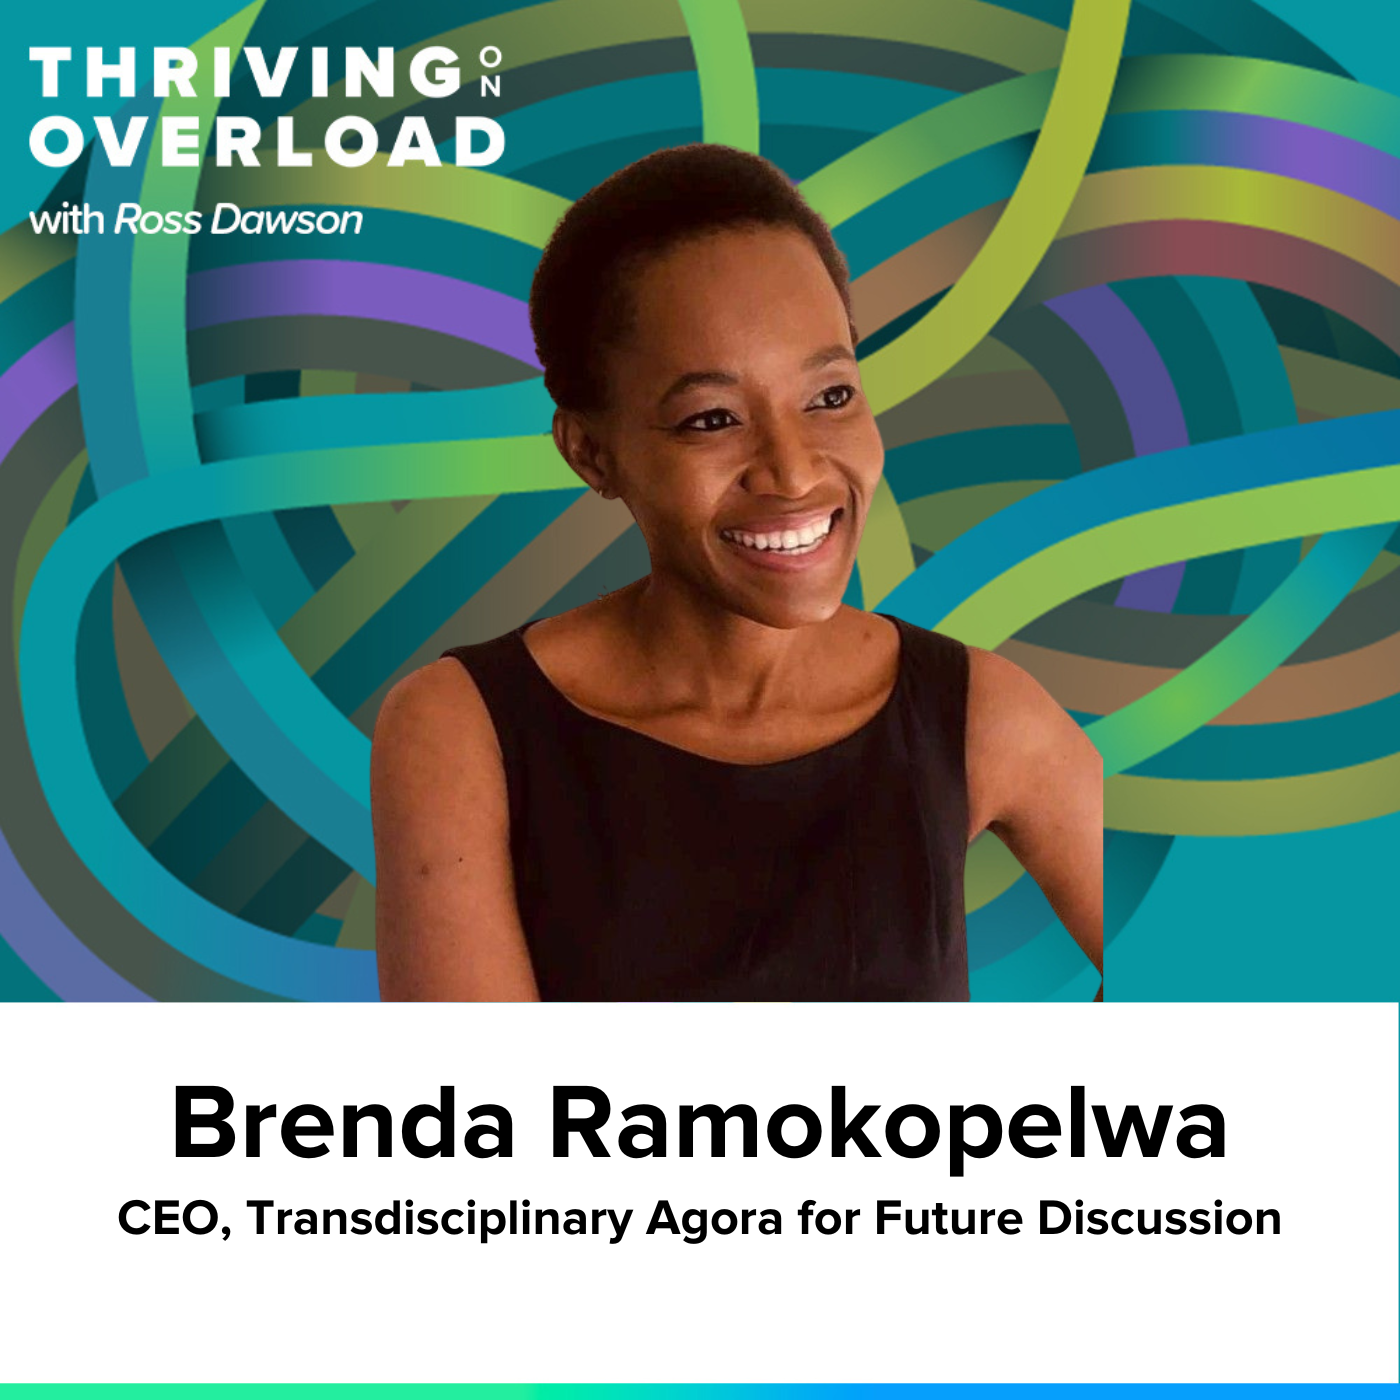 Brenda Ramokopelwa on using external and internal lenses, developing young futurists, connecting rural Africa to global thinking, and validating ideas (Ep26)